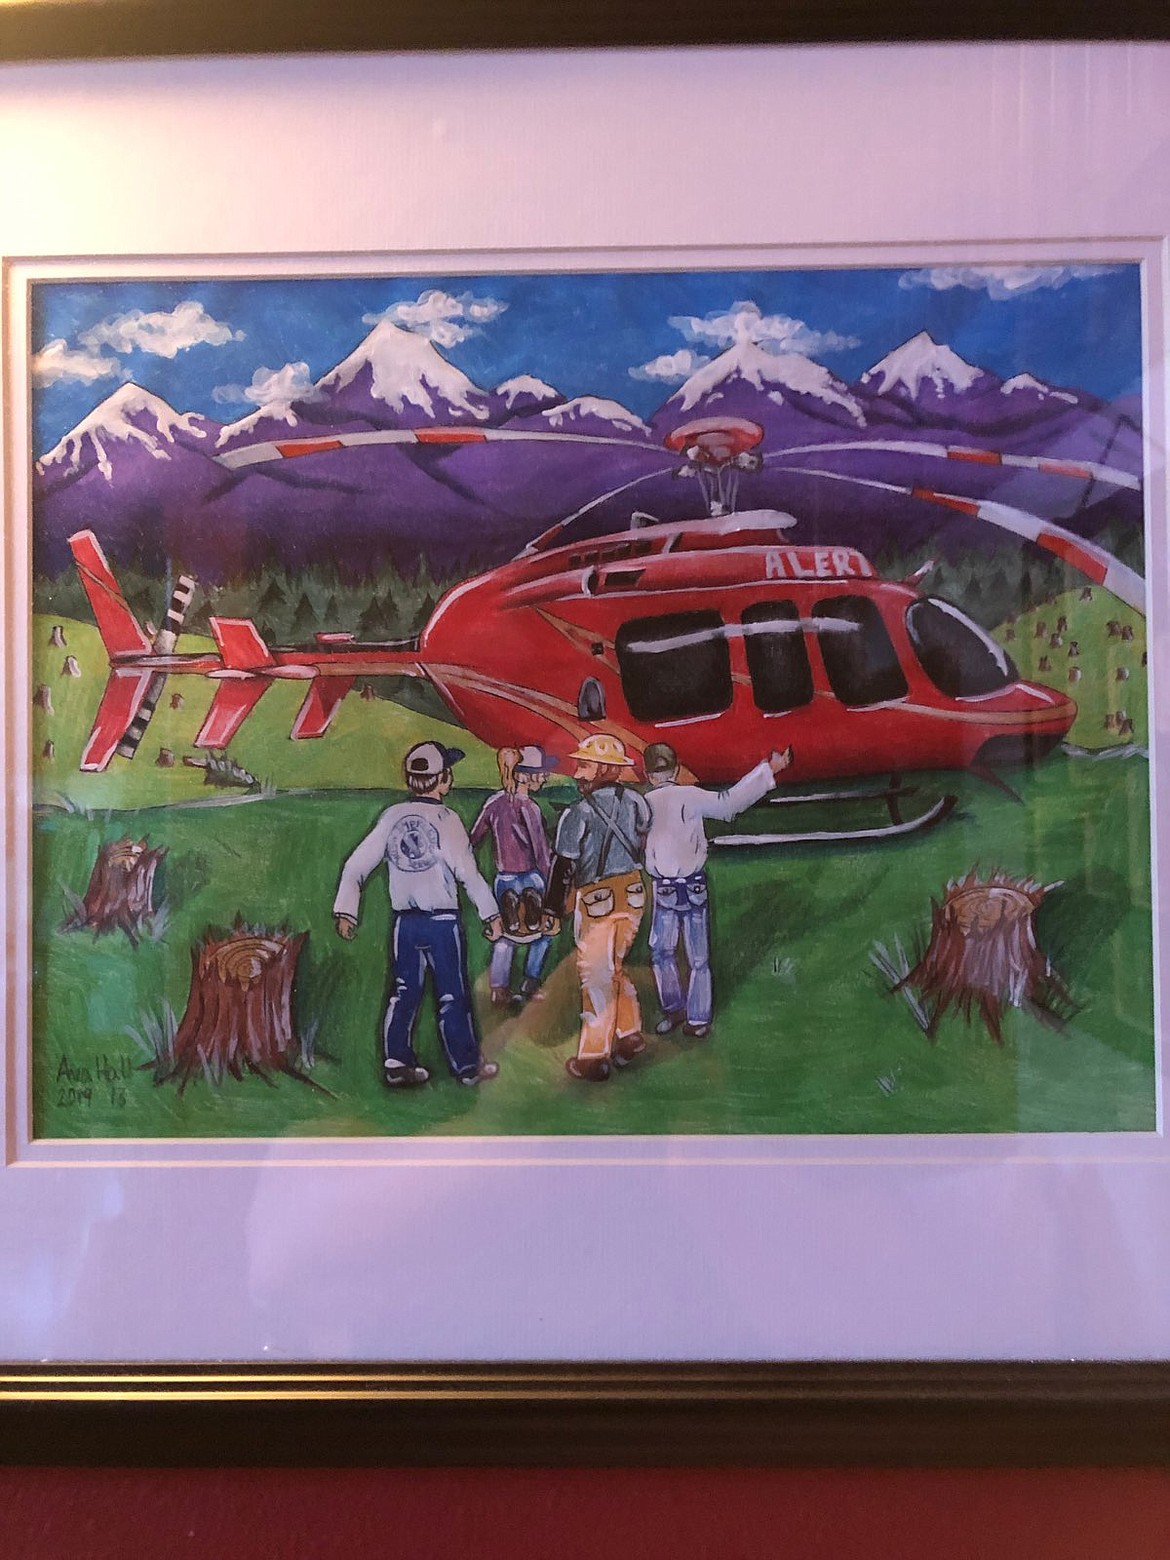 Hall&#146;s portrayal of an injured logger being loaded into the ALERT helicopter won this year&#146;s Montana Department of Transportation Aviation Awareness Art Contest.